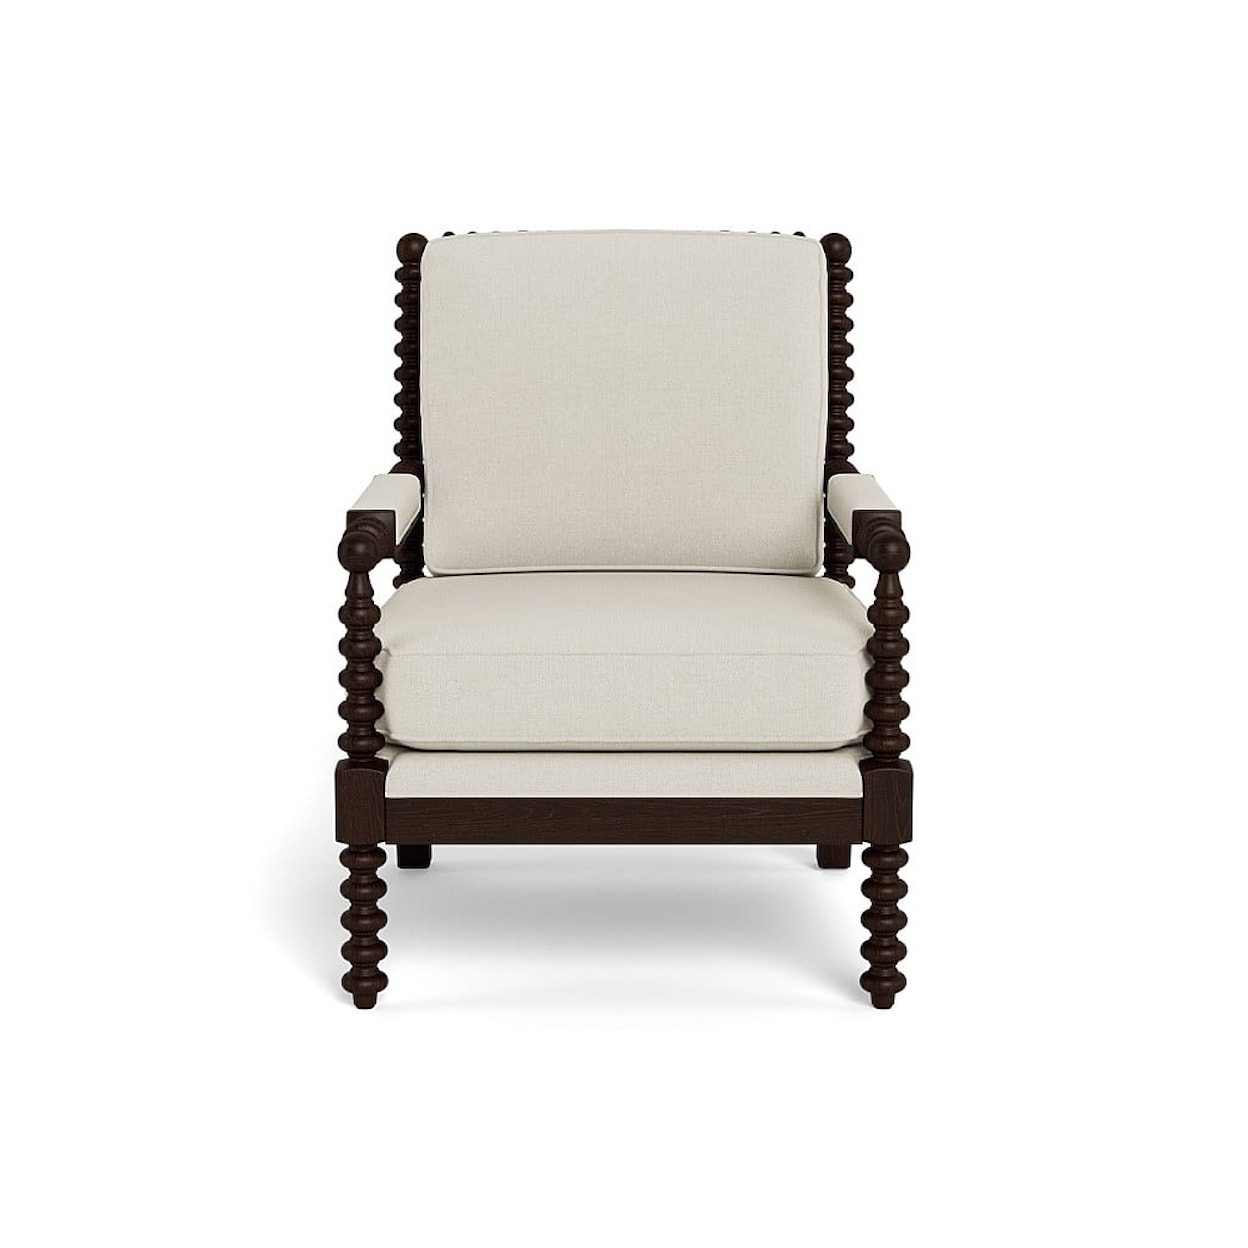 Universal Sundance SOHO ACCENT CHAIR - SPECIAL ORDER